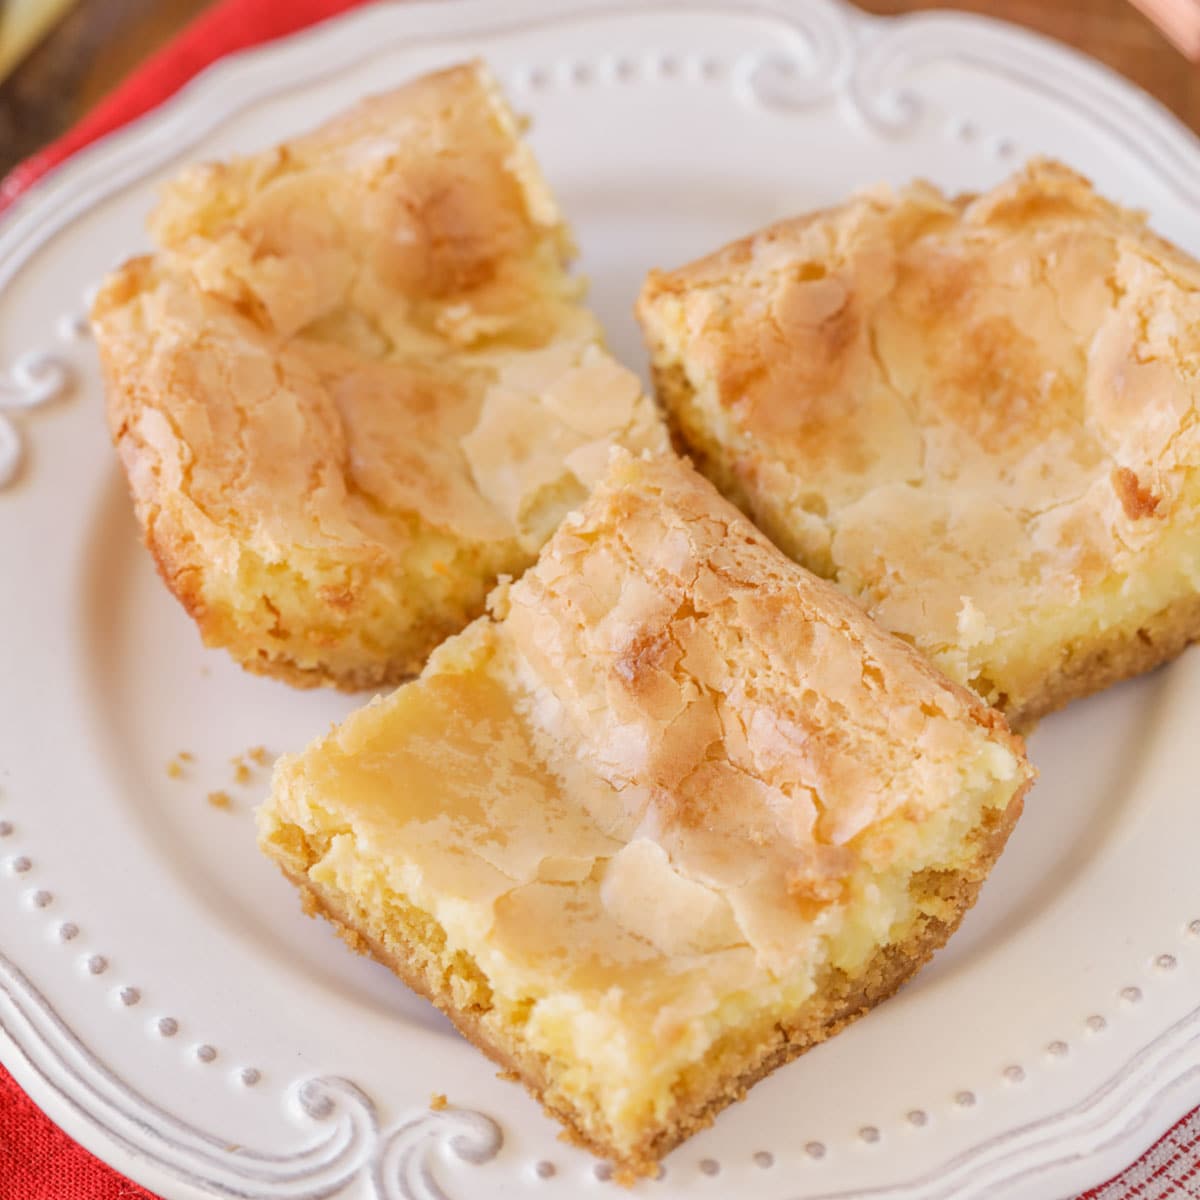 New years eve desserts - 3 squares of gooey butter cake served on a white plate.